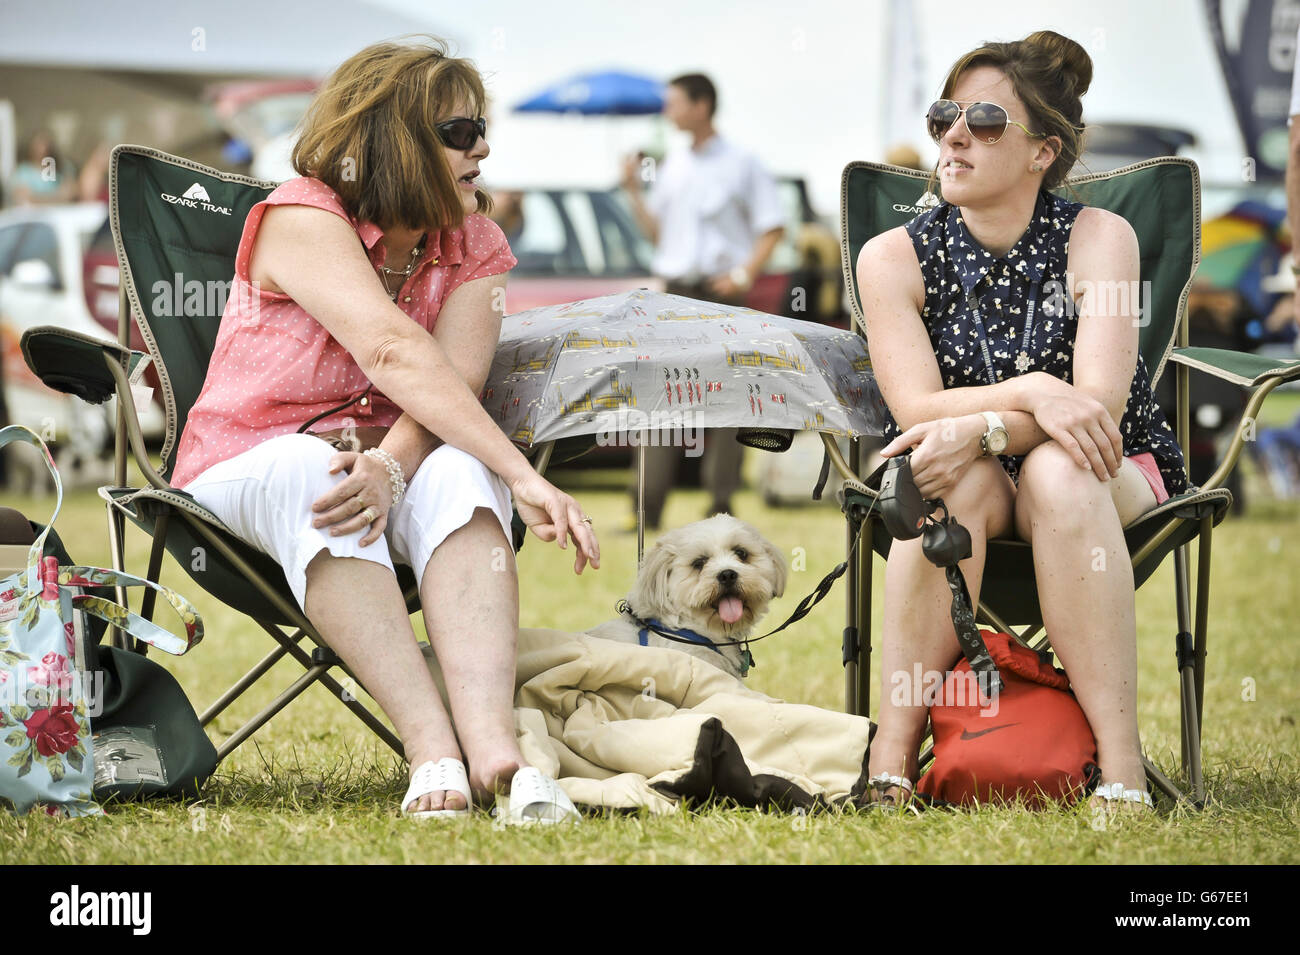 A dog takes shade under an umbrella in the hot sunshine during day four of the Barbury International Horse Trials at Barbury Castle, Wiltshire. Stock Photo